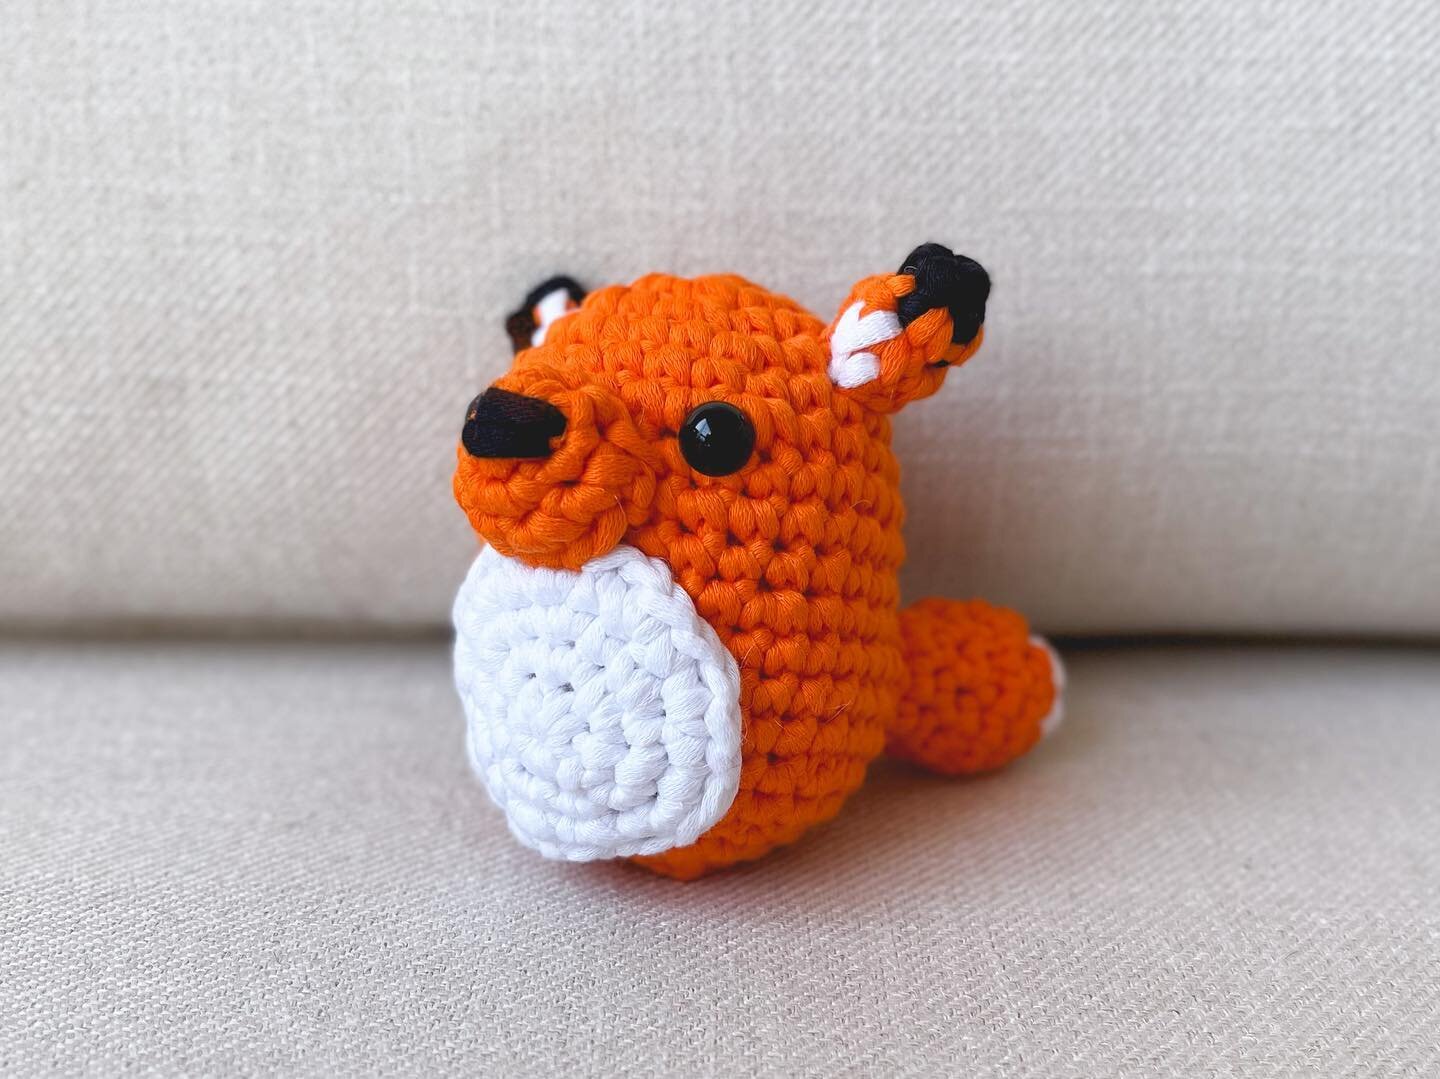 Made another one from @thewoobles so cute so fun~ gonna try making some cat hats now with the extra yarn 
-
#thewoobles #crochet #felixthefox #amigurumis #fox #toy #doll #handmade #thewooblesfox